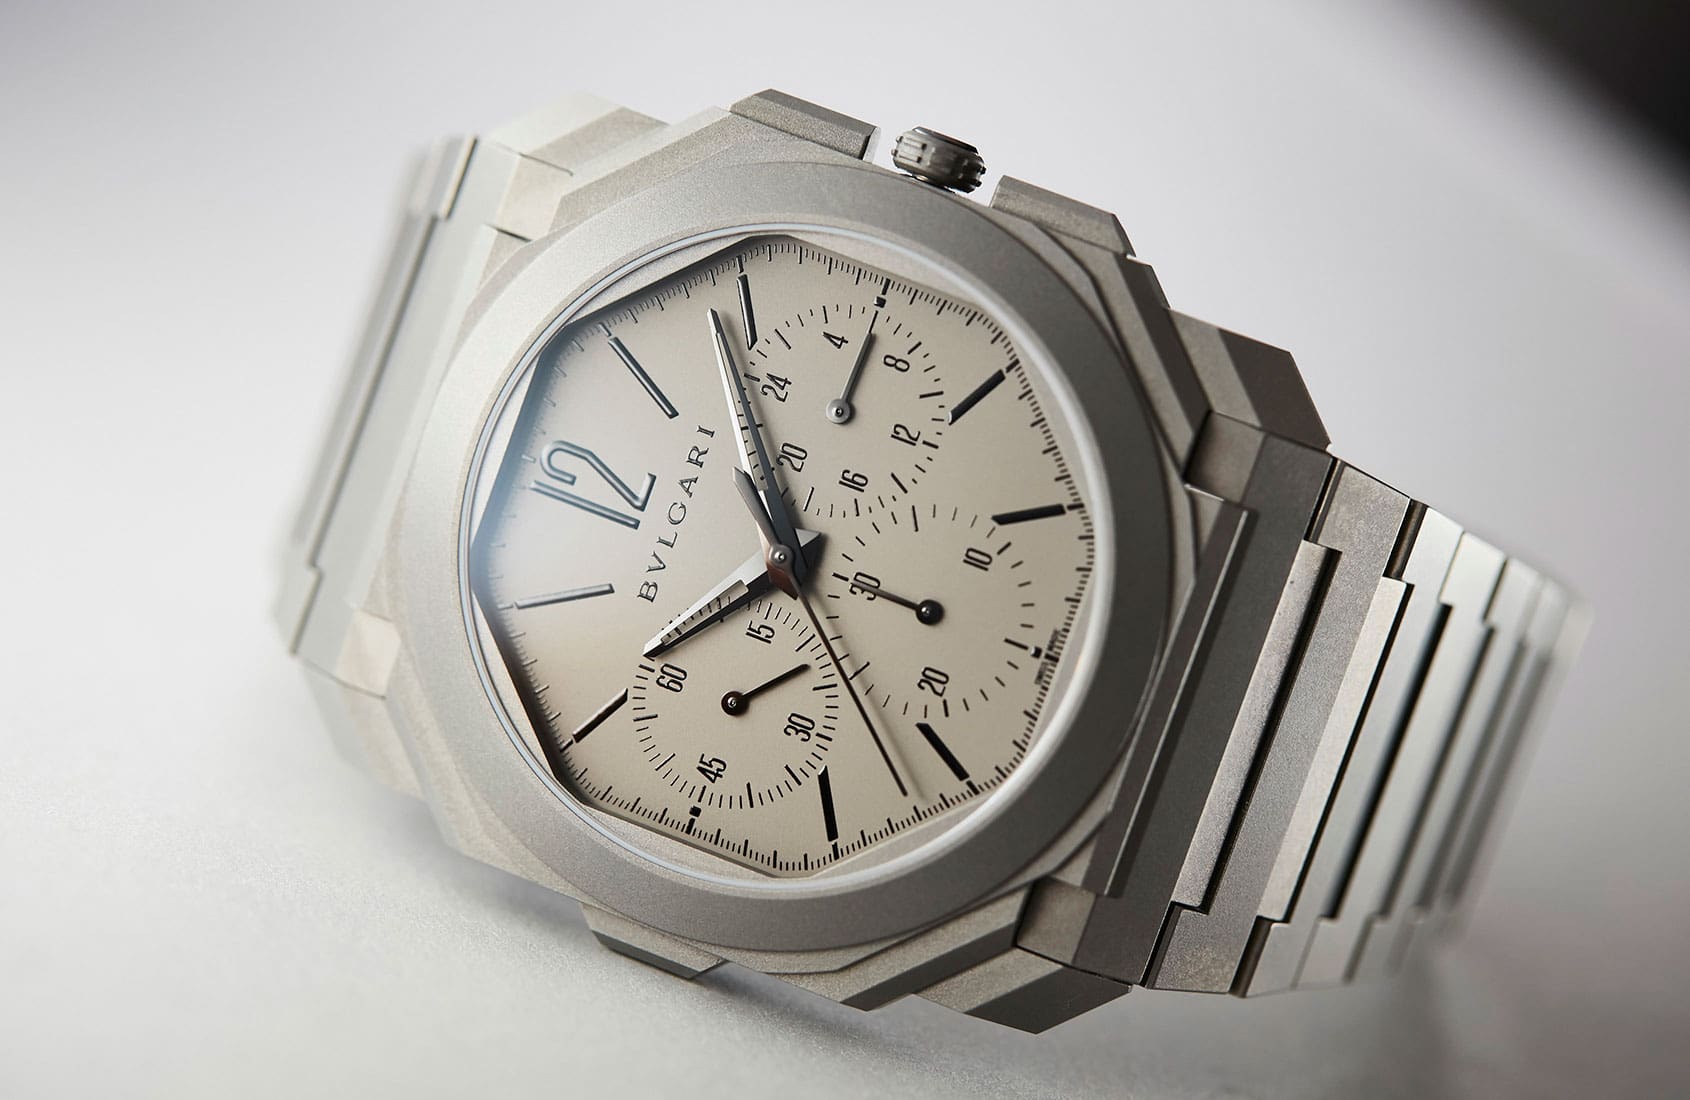 Bulgari CEO drops an Octo Finissimo Chronograph on the ground to make a point